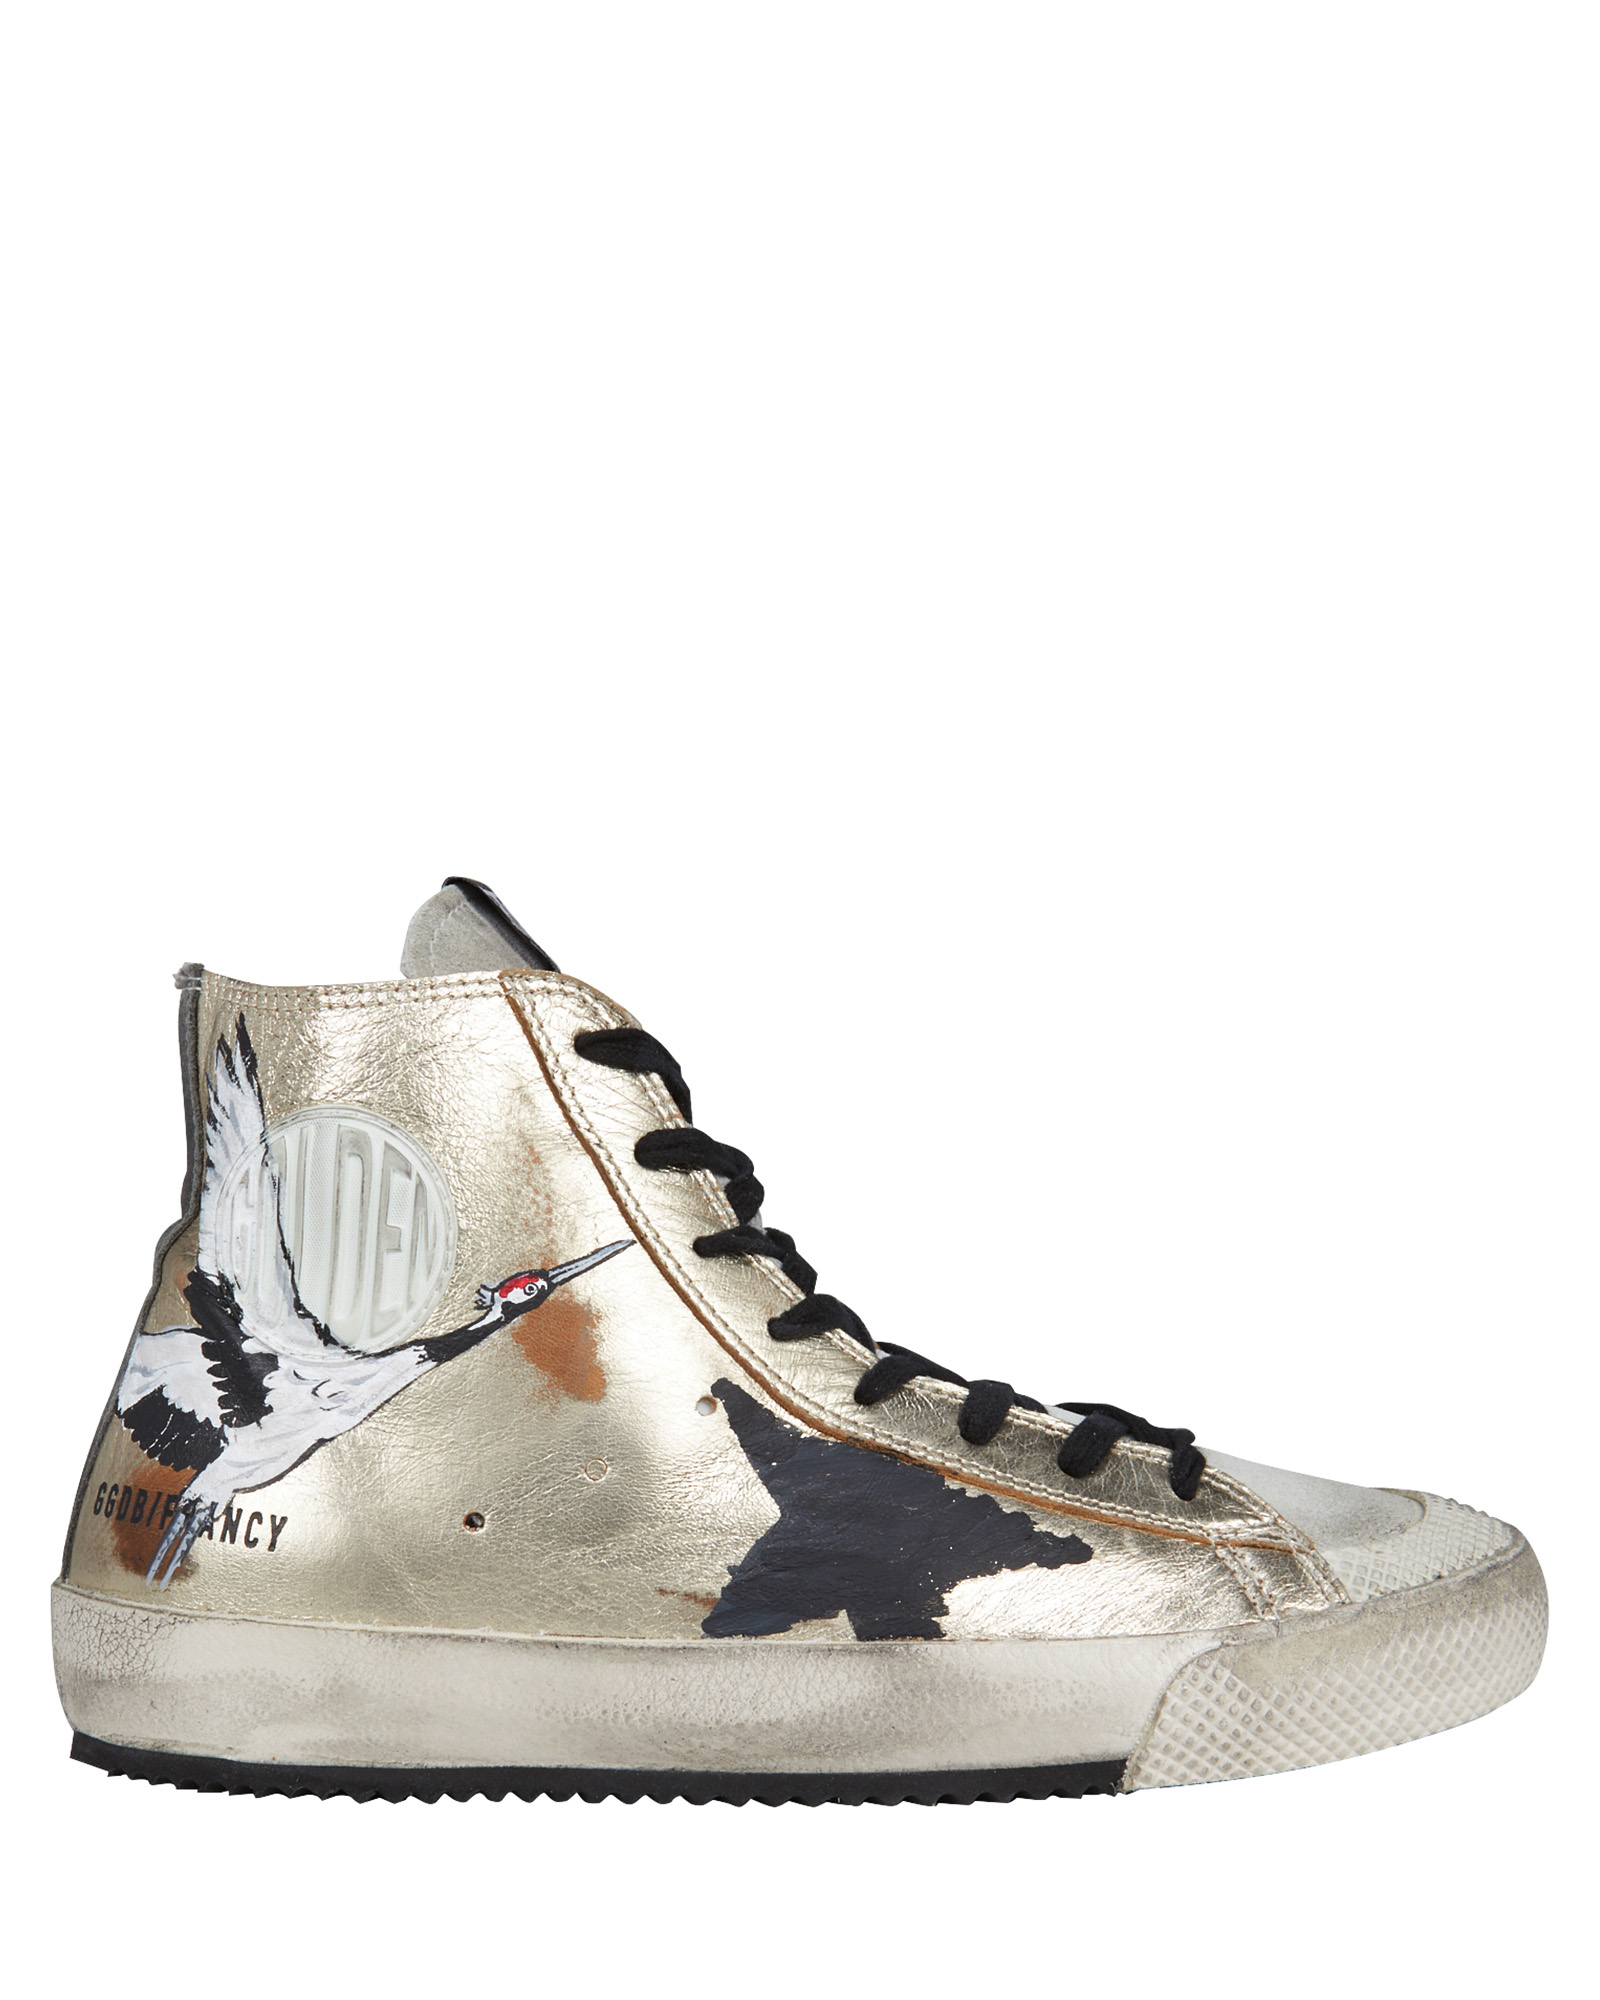 Francy High-Top Painted Star Sneakers | INTERMIX®